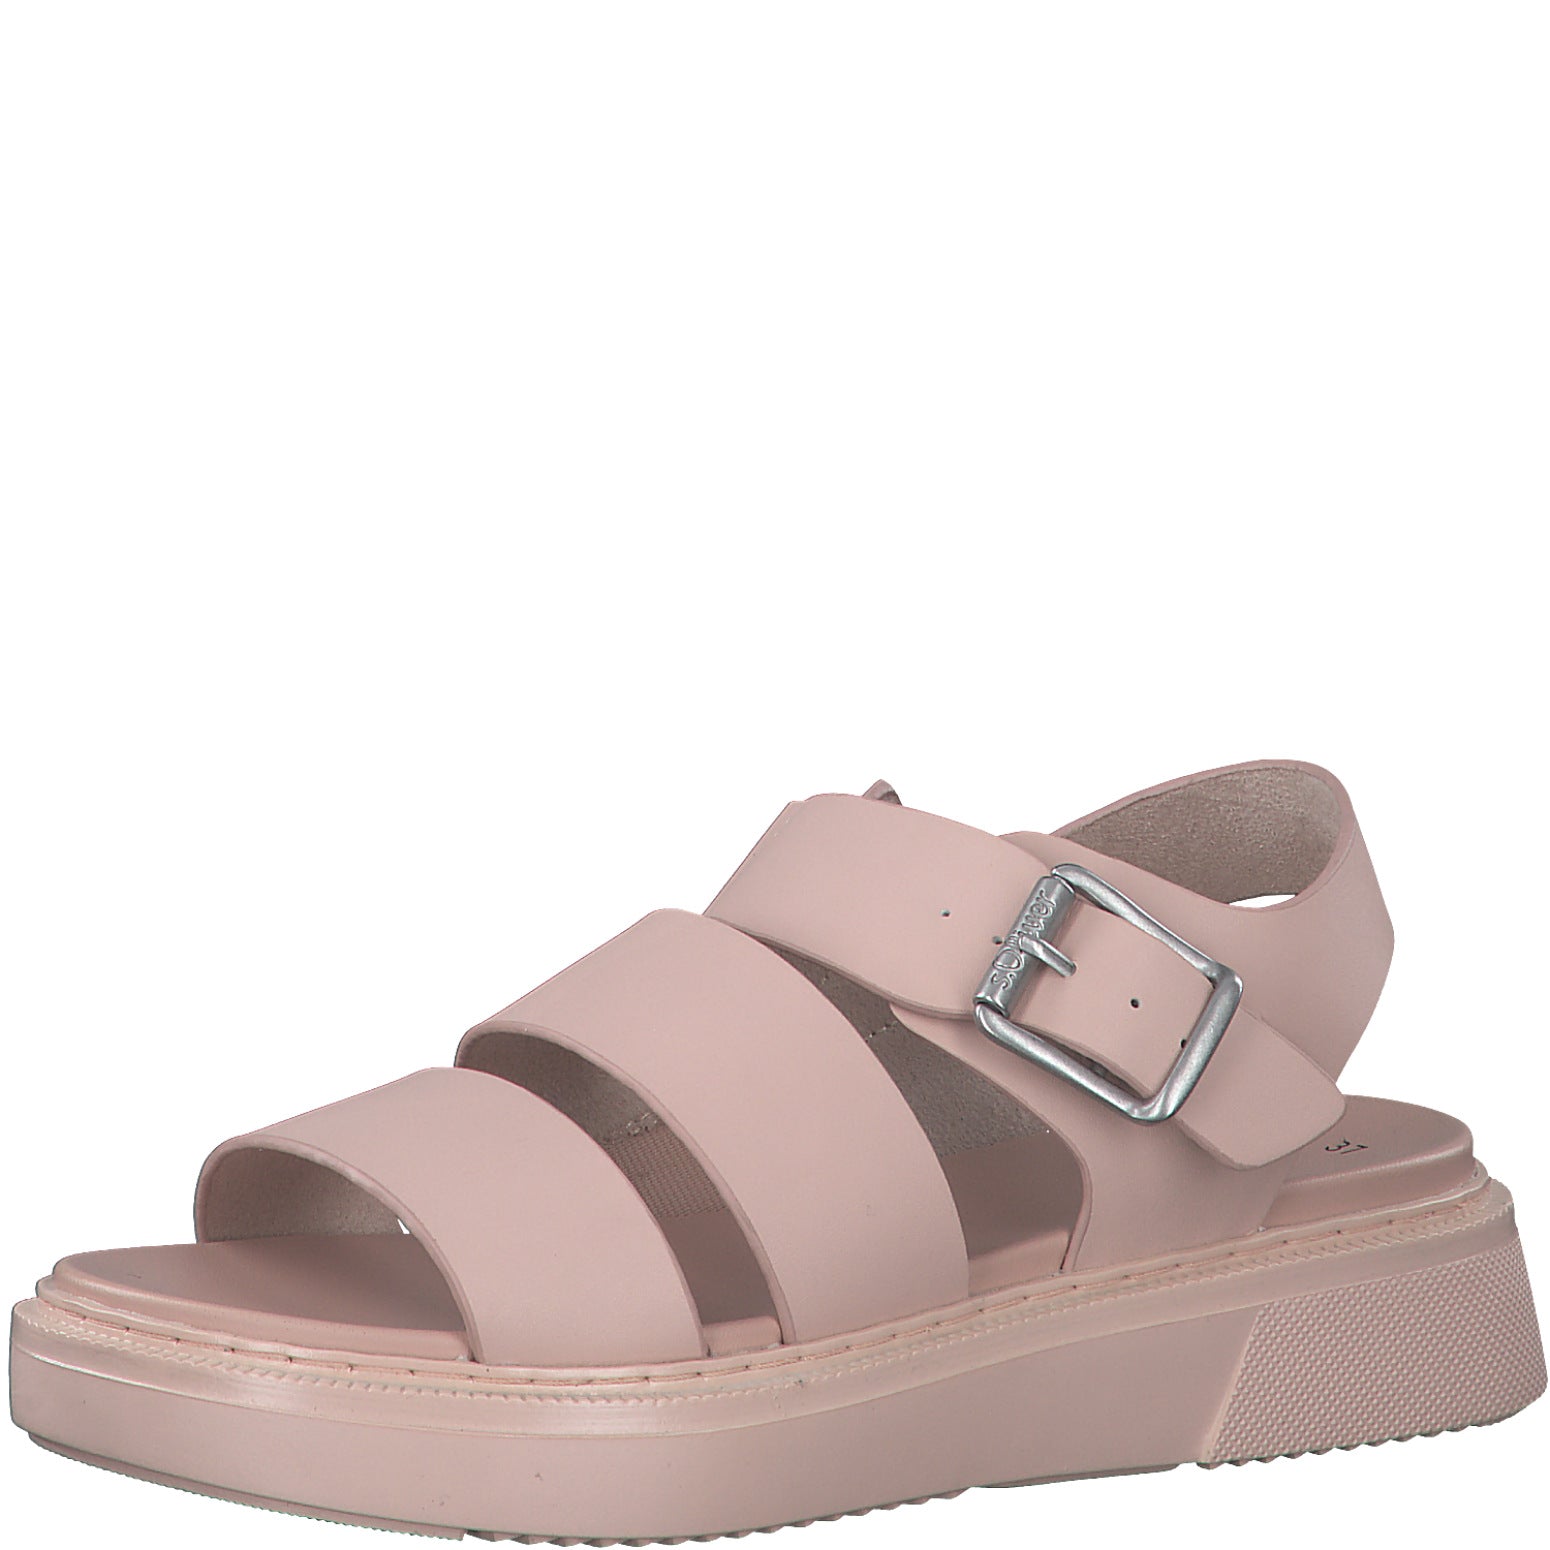 S.Oliver chunky sole Sandals -Rose